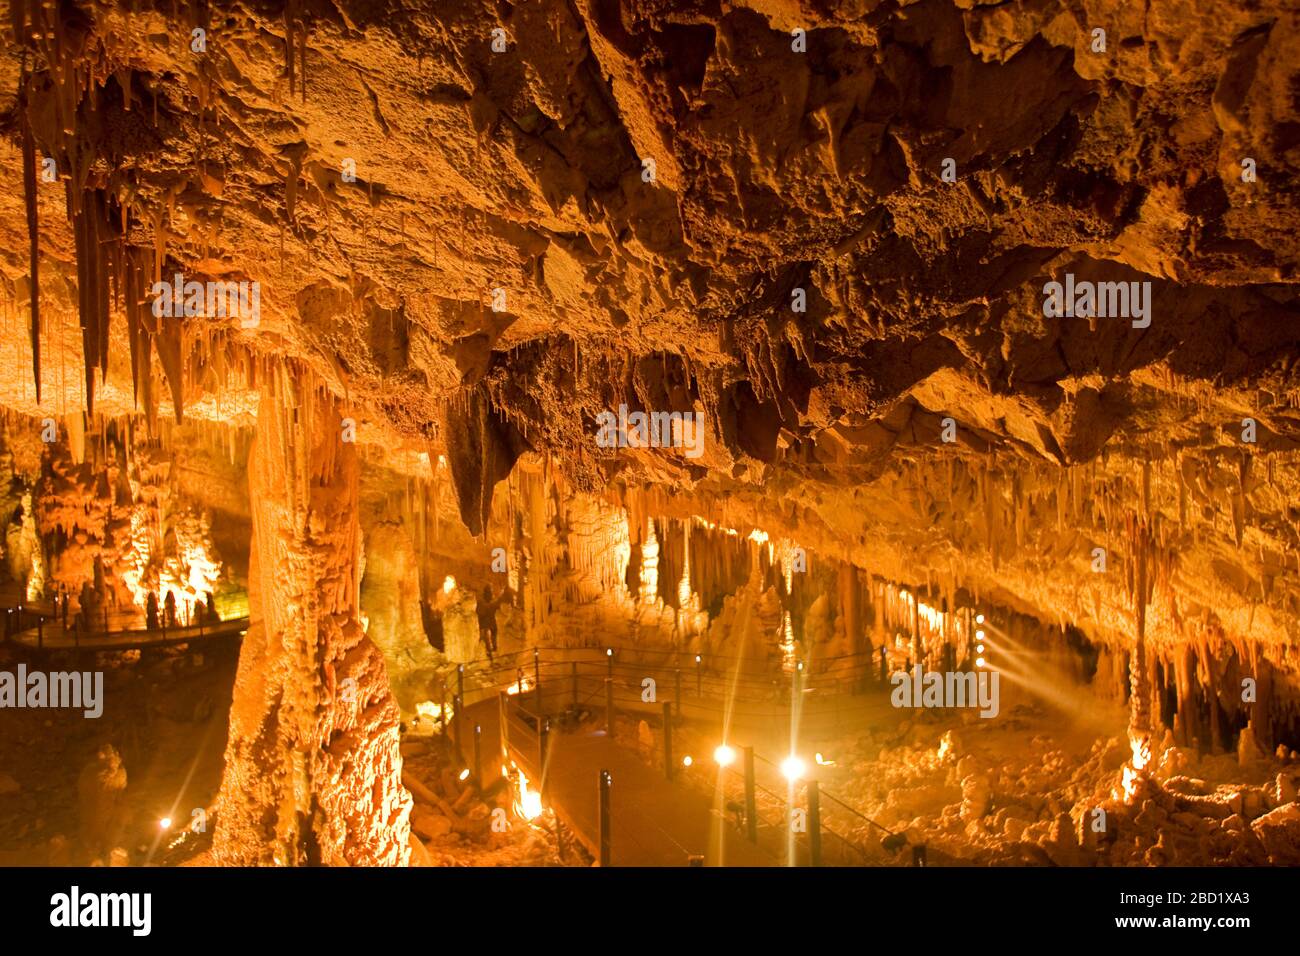 Cave coral at the Soreq Stalactite Cave Nature Reserve (also called Avshalom Cave). This 82-meter-long,60-meter-wide cave is on the western slopes of Stock Photo